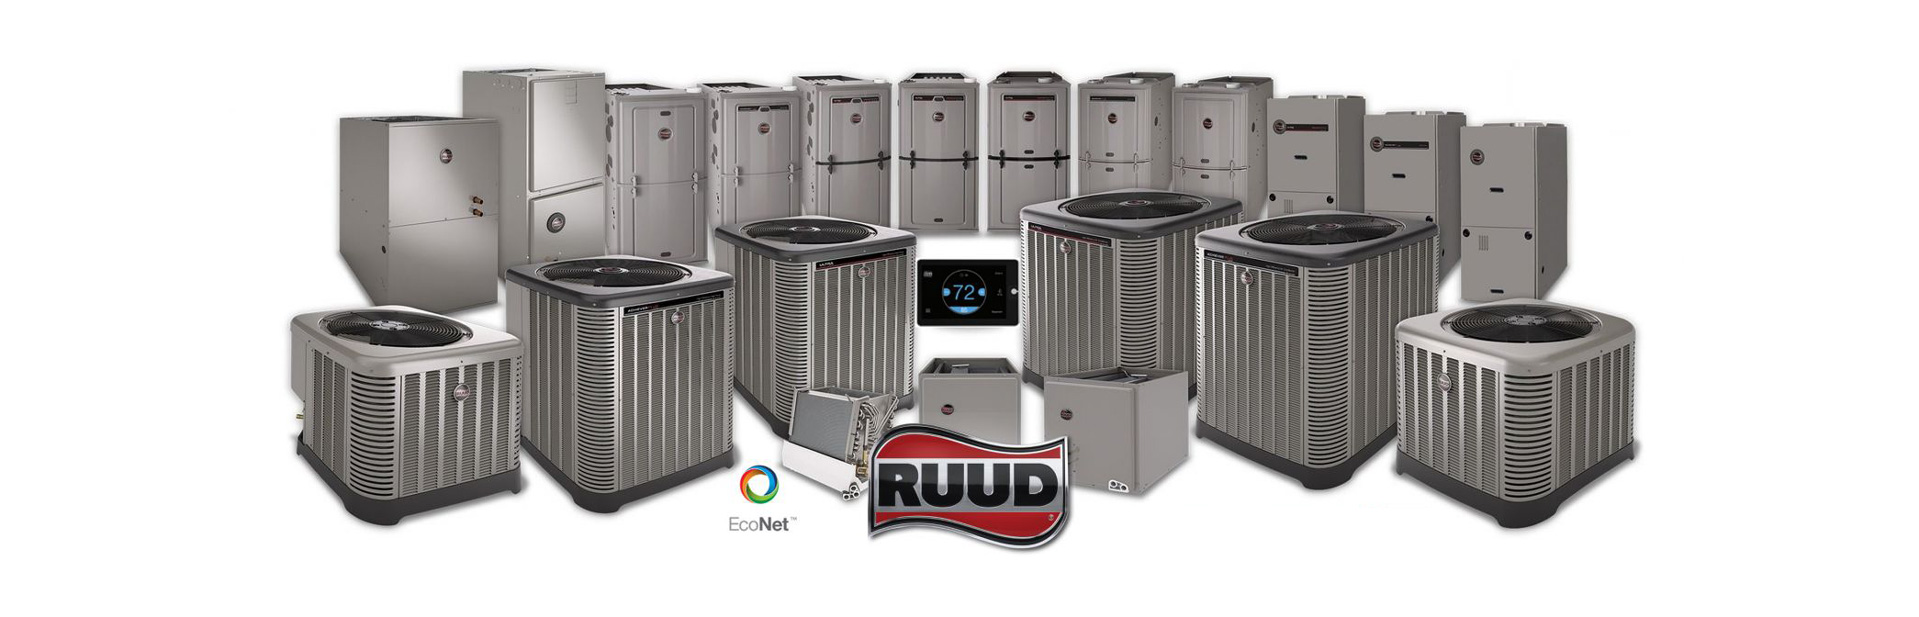 ruud-air-conditioners-furnace-installation-portland-comfort-heating